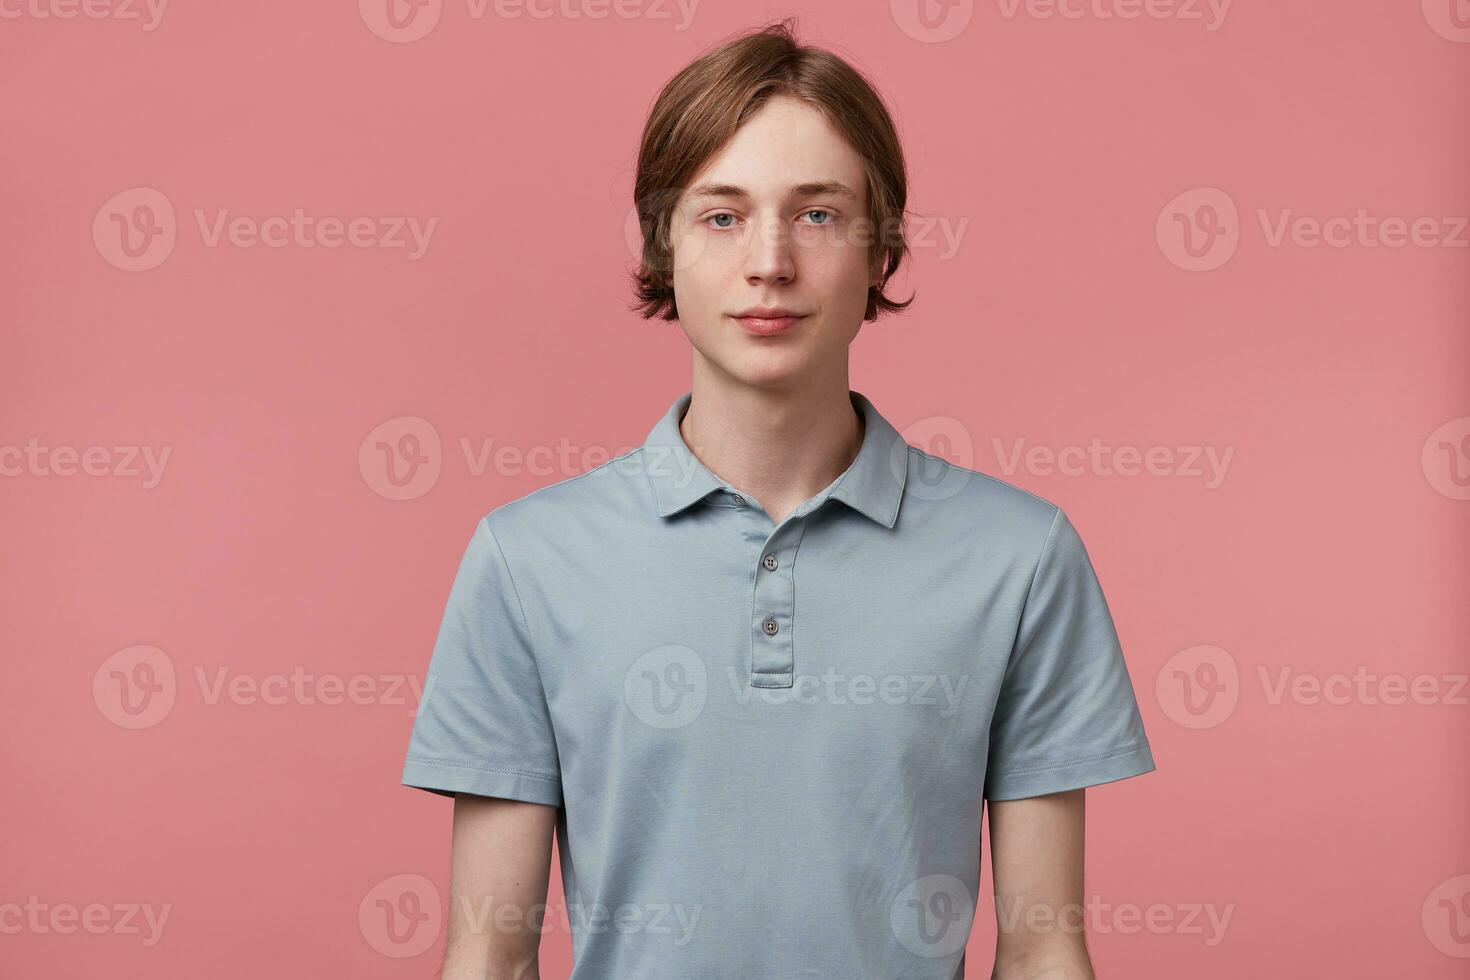 Young man did not slept for a long time, tired, zombie eyes, slightly-open eyes, looks calm, express no feelings, dressed in polo T-shirt, isolated over pink background photo